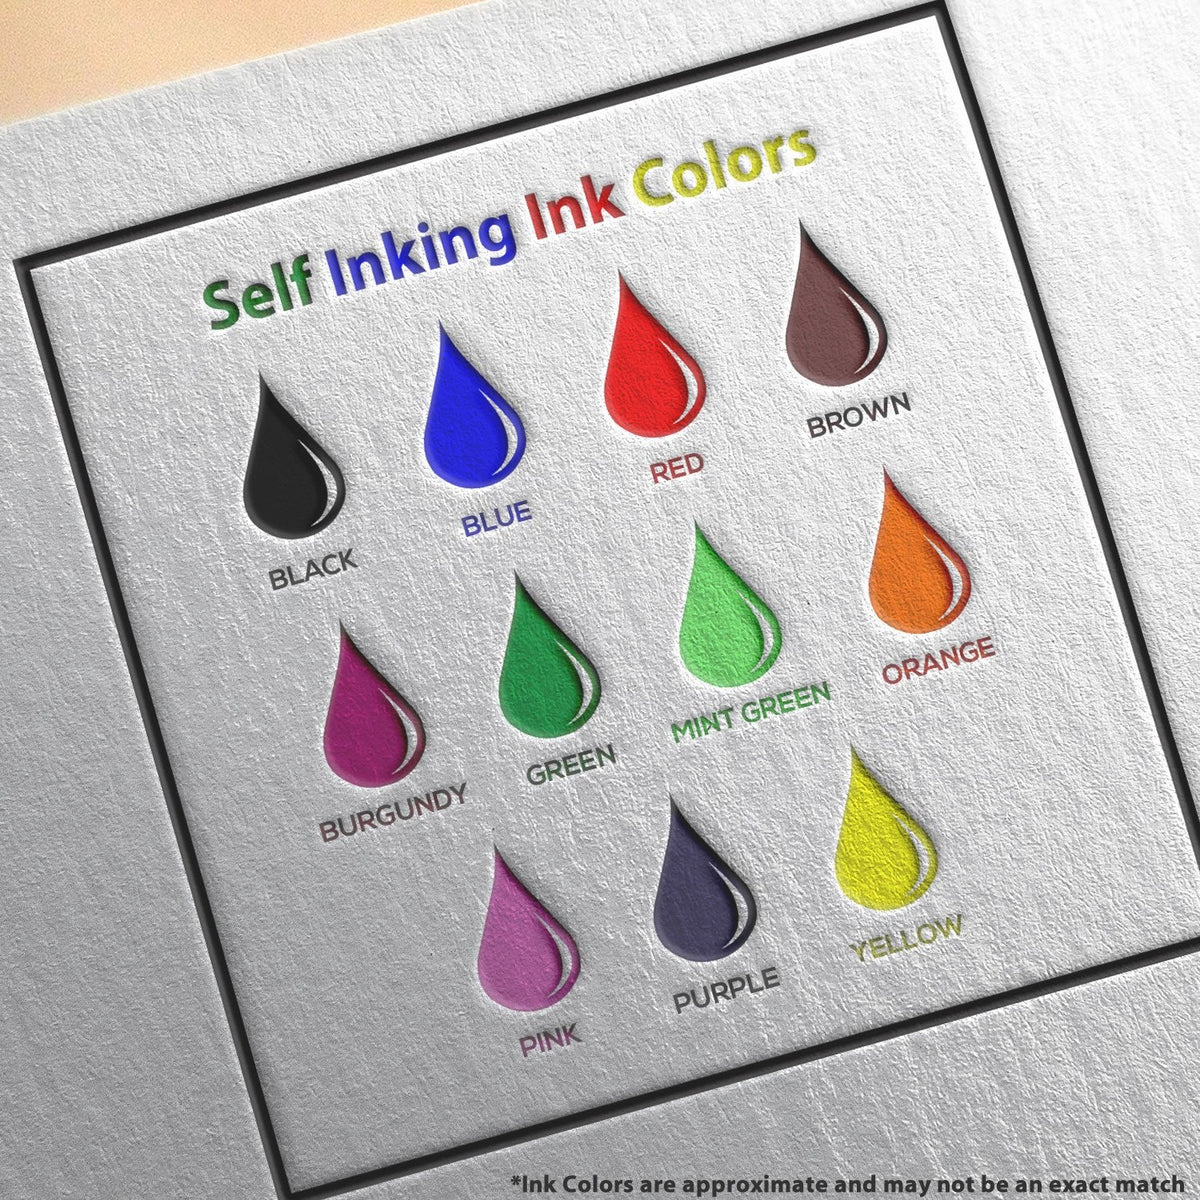 Self-Inking Rush with Rabbit Stamp Ink Color Options